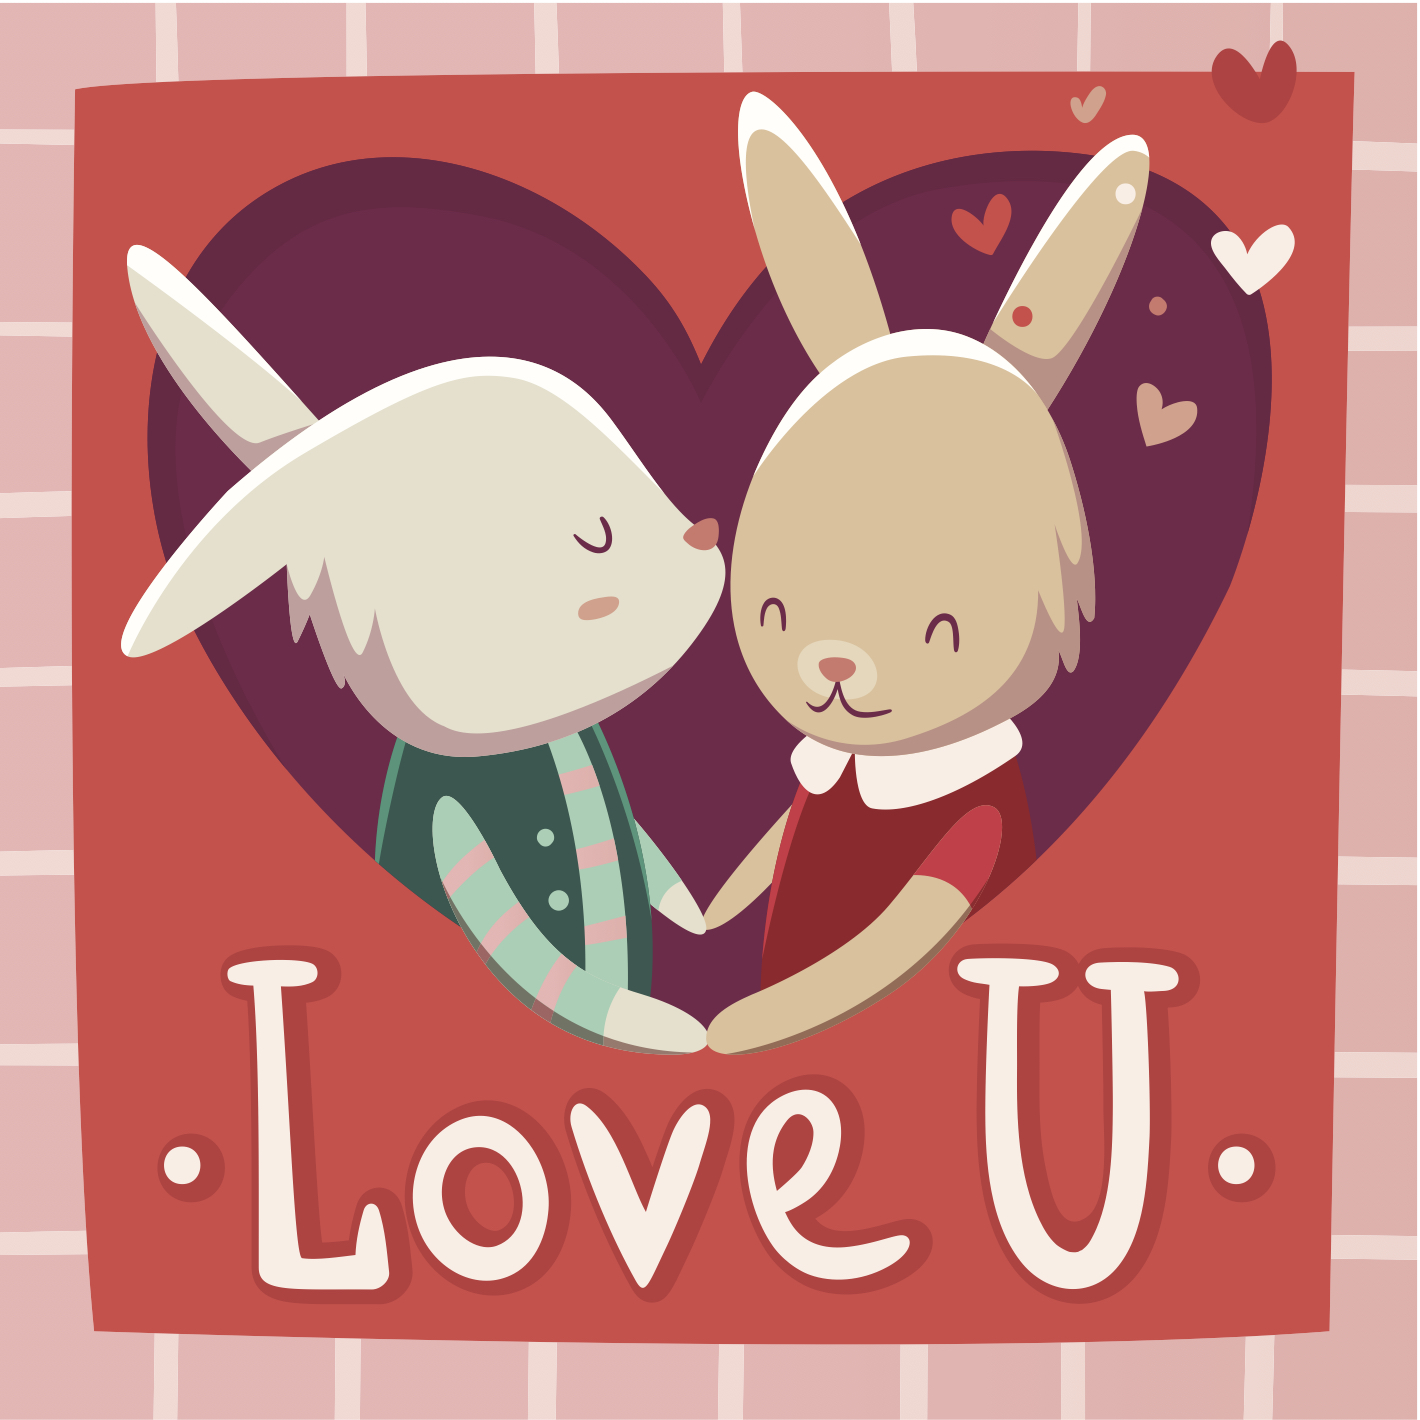 Valentine's Day eCard with two cartoon bunnies holding hands